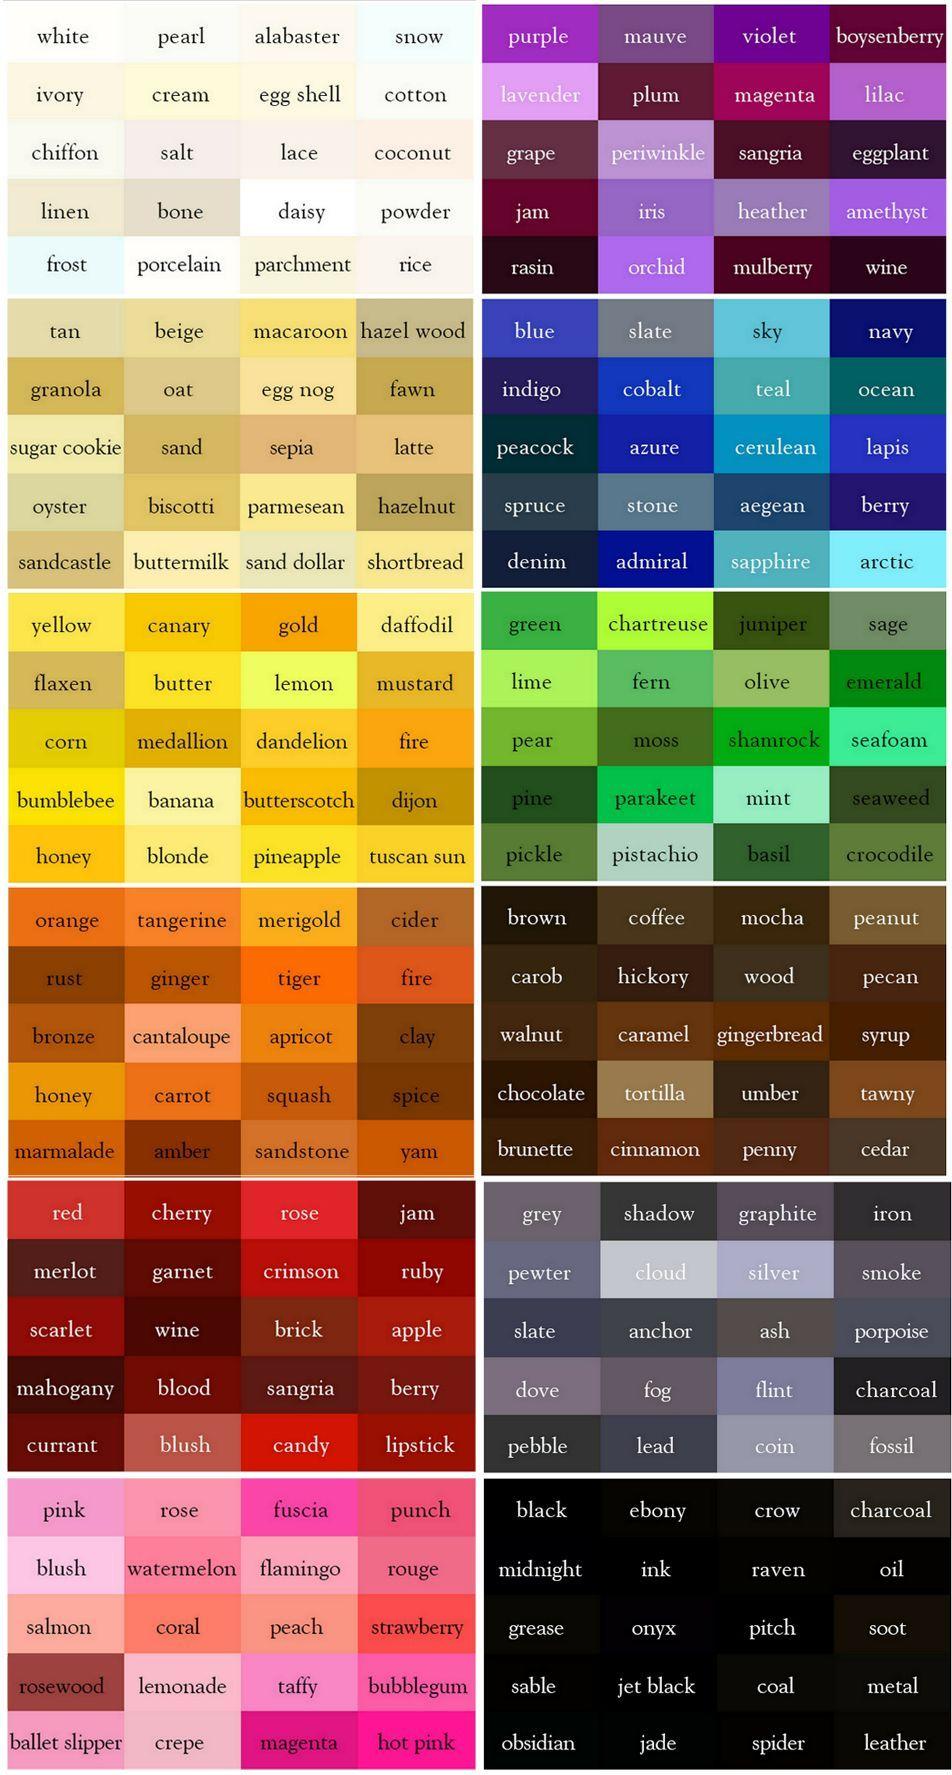 Blue Green Red-Orange Logo - The Color Thesaurus for Writers and Designers from Ingrid's Notes ...